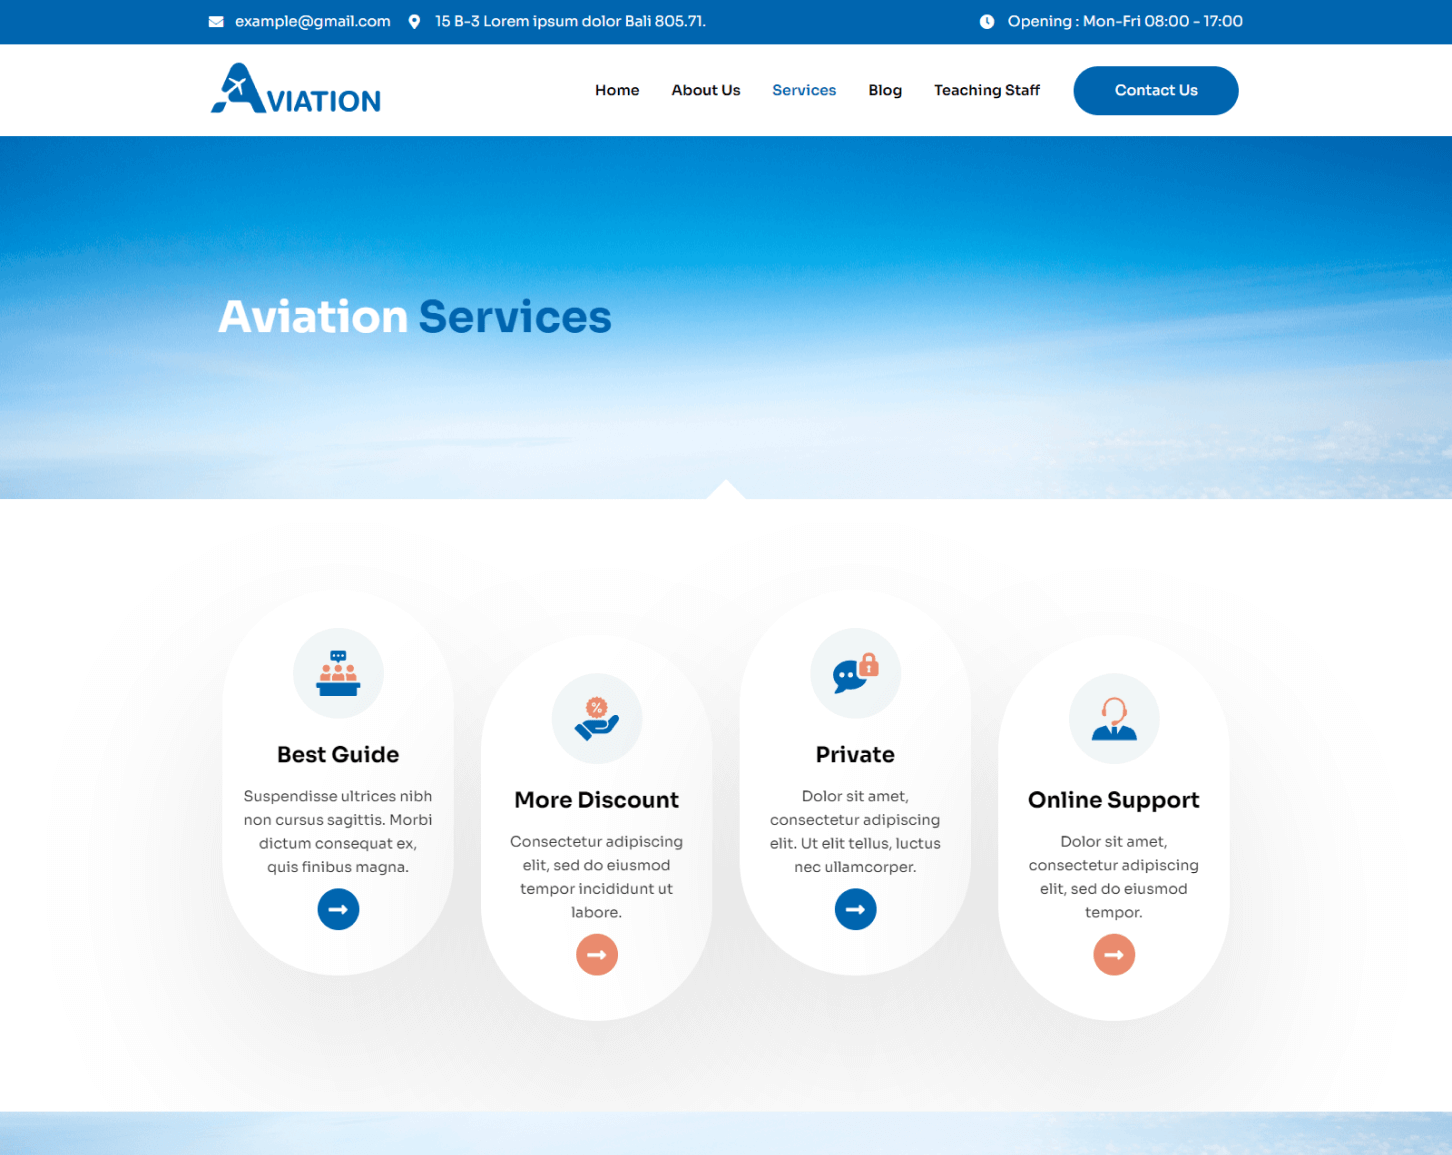 03. Aviation Services